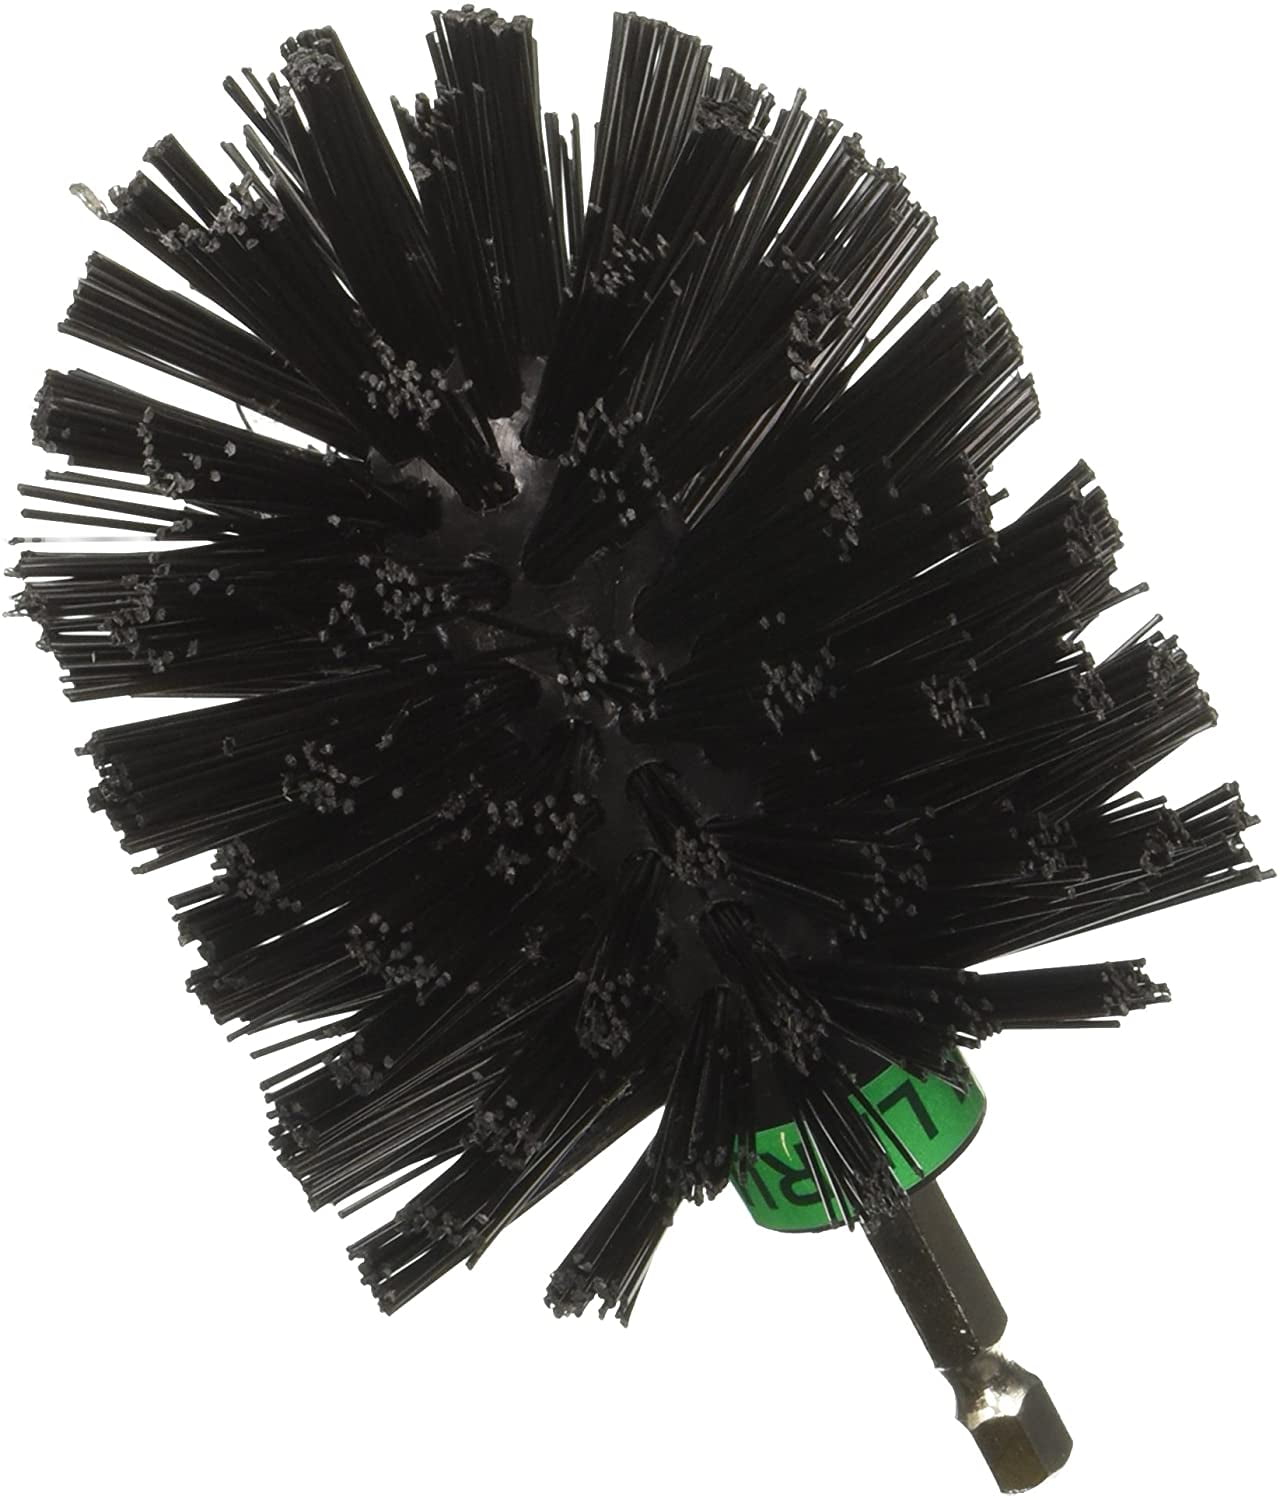 Mini Size Nylon Bristle Motorized Spinning Battery Powered Electric Grill Cleaning Brush by Drillbrush - Bristles Are Safe for Consumption - The Best